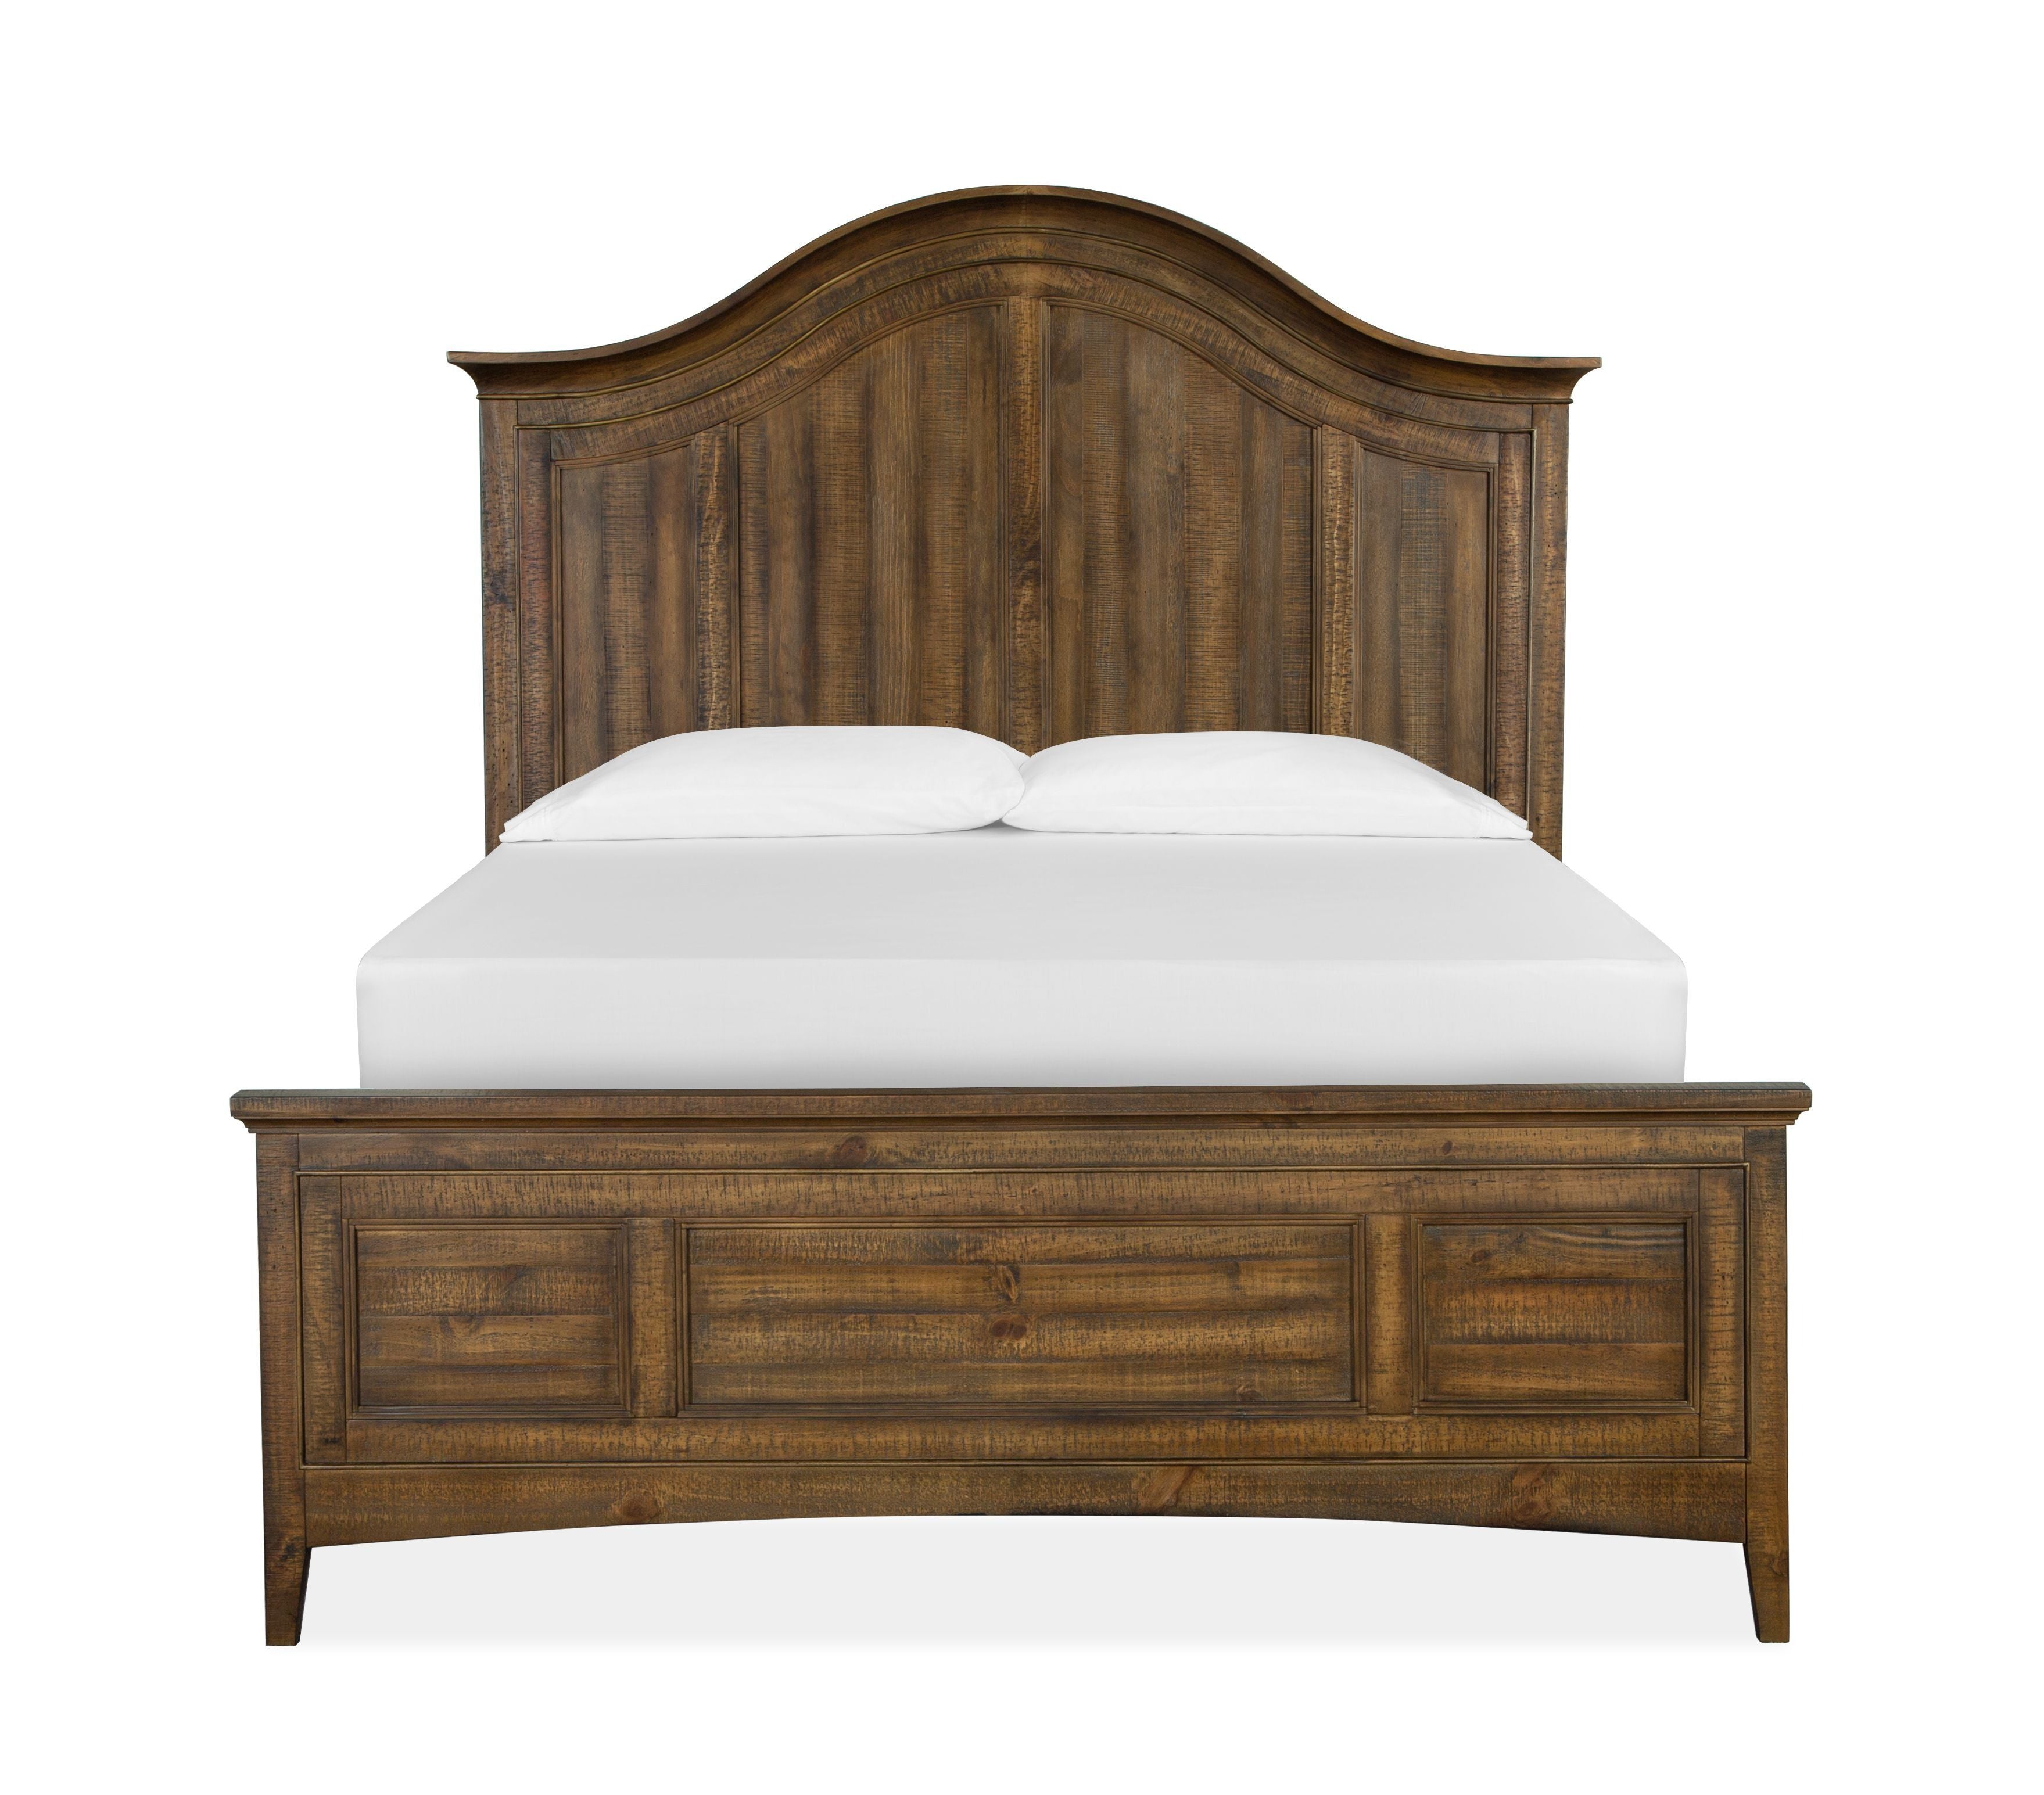 Bay Creek - Complete Arched Bed With Storage Rails